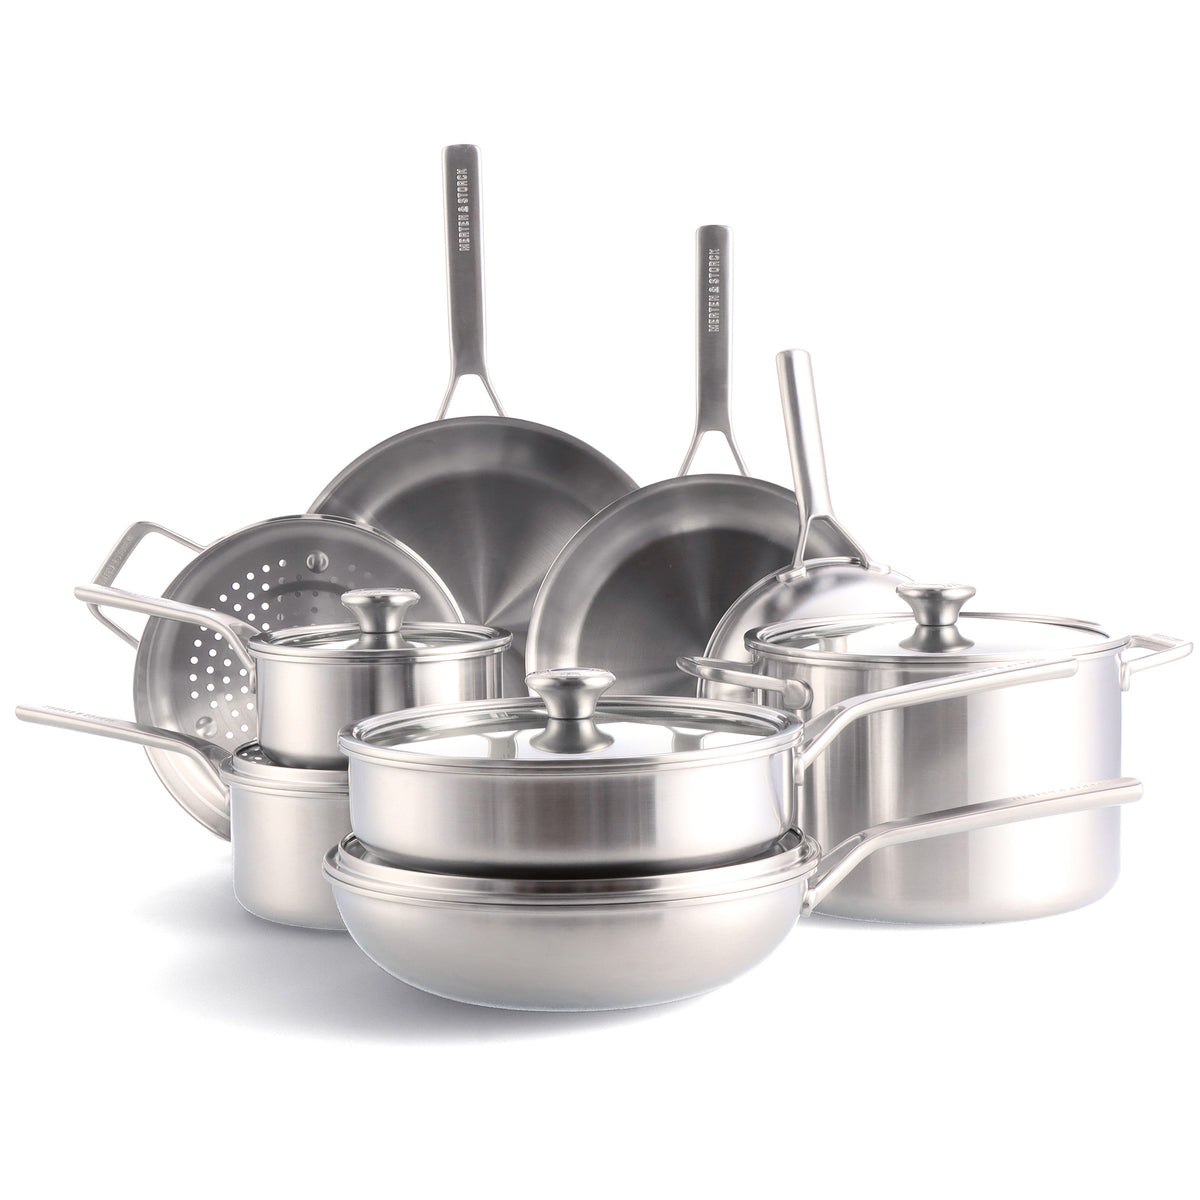 14 piece stainless steel cookware set arranged on a white background.